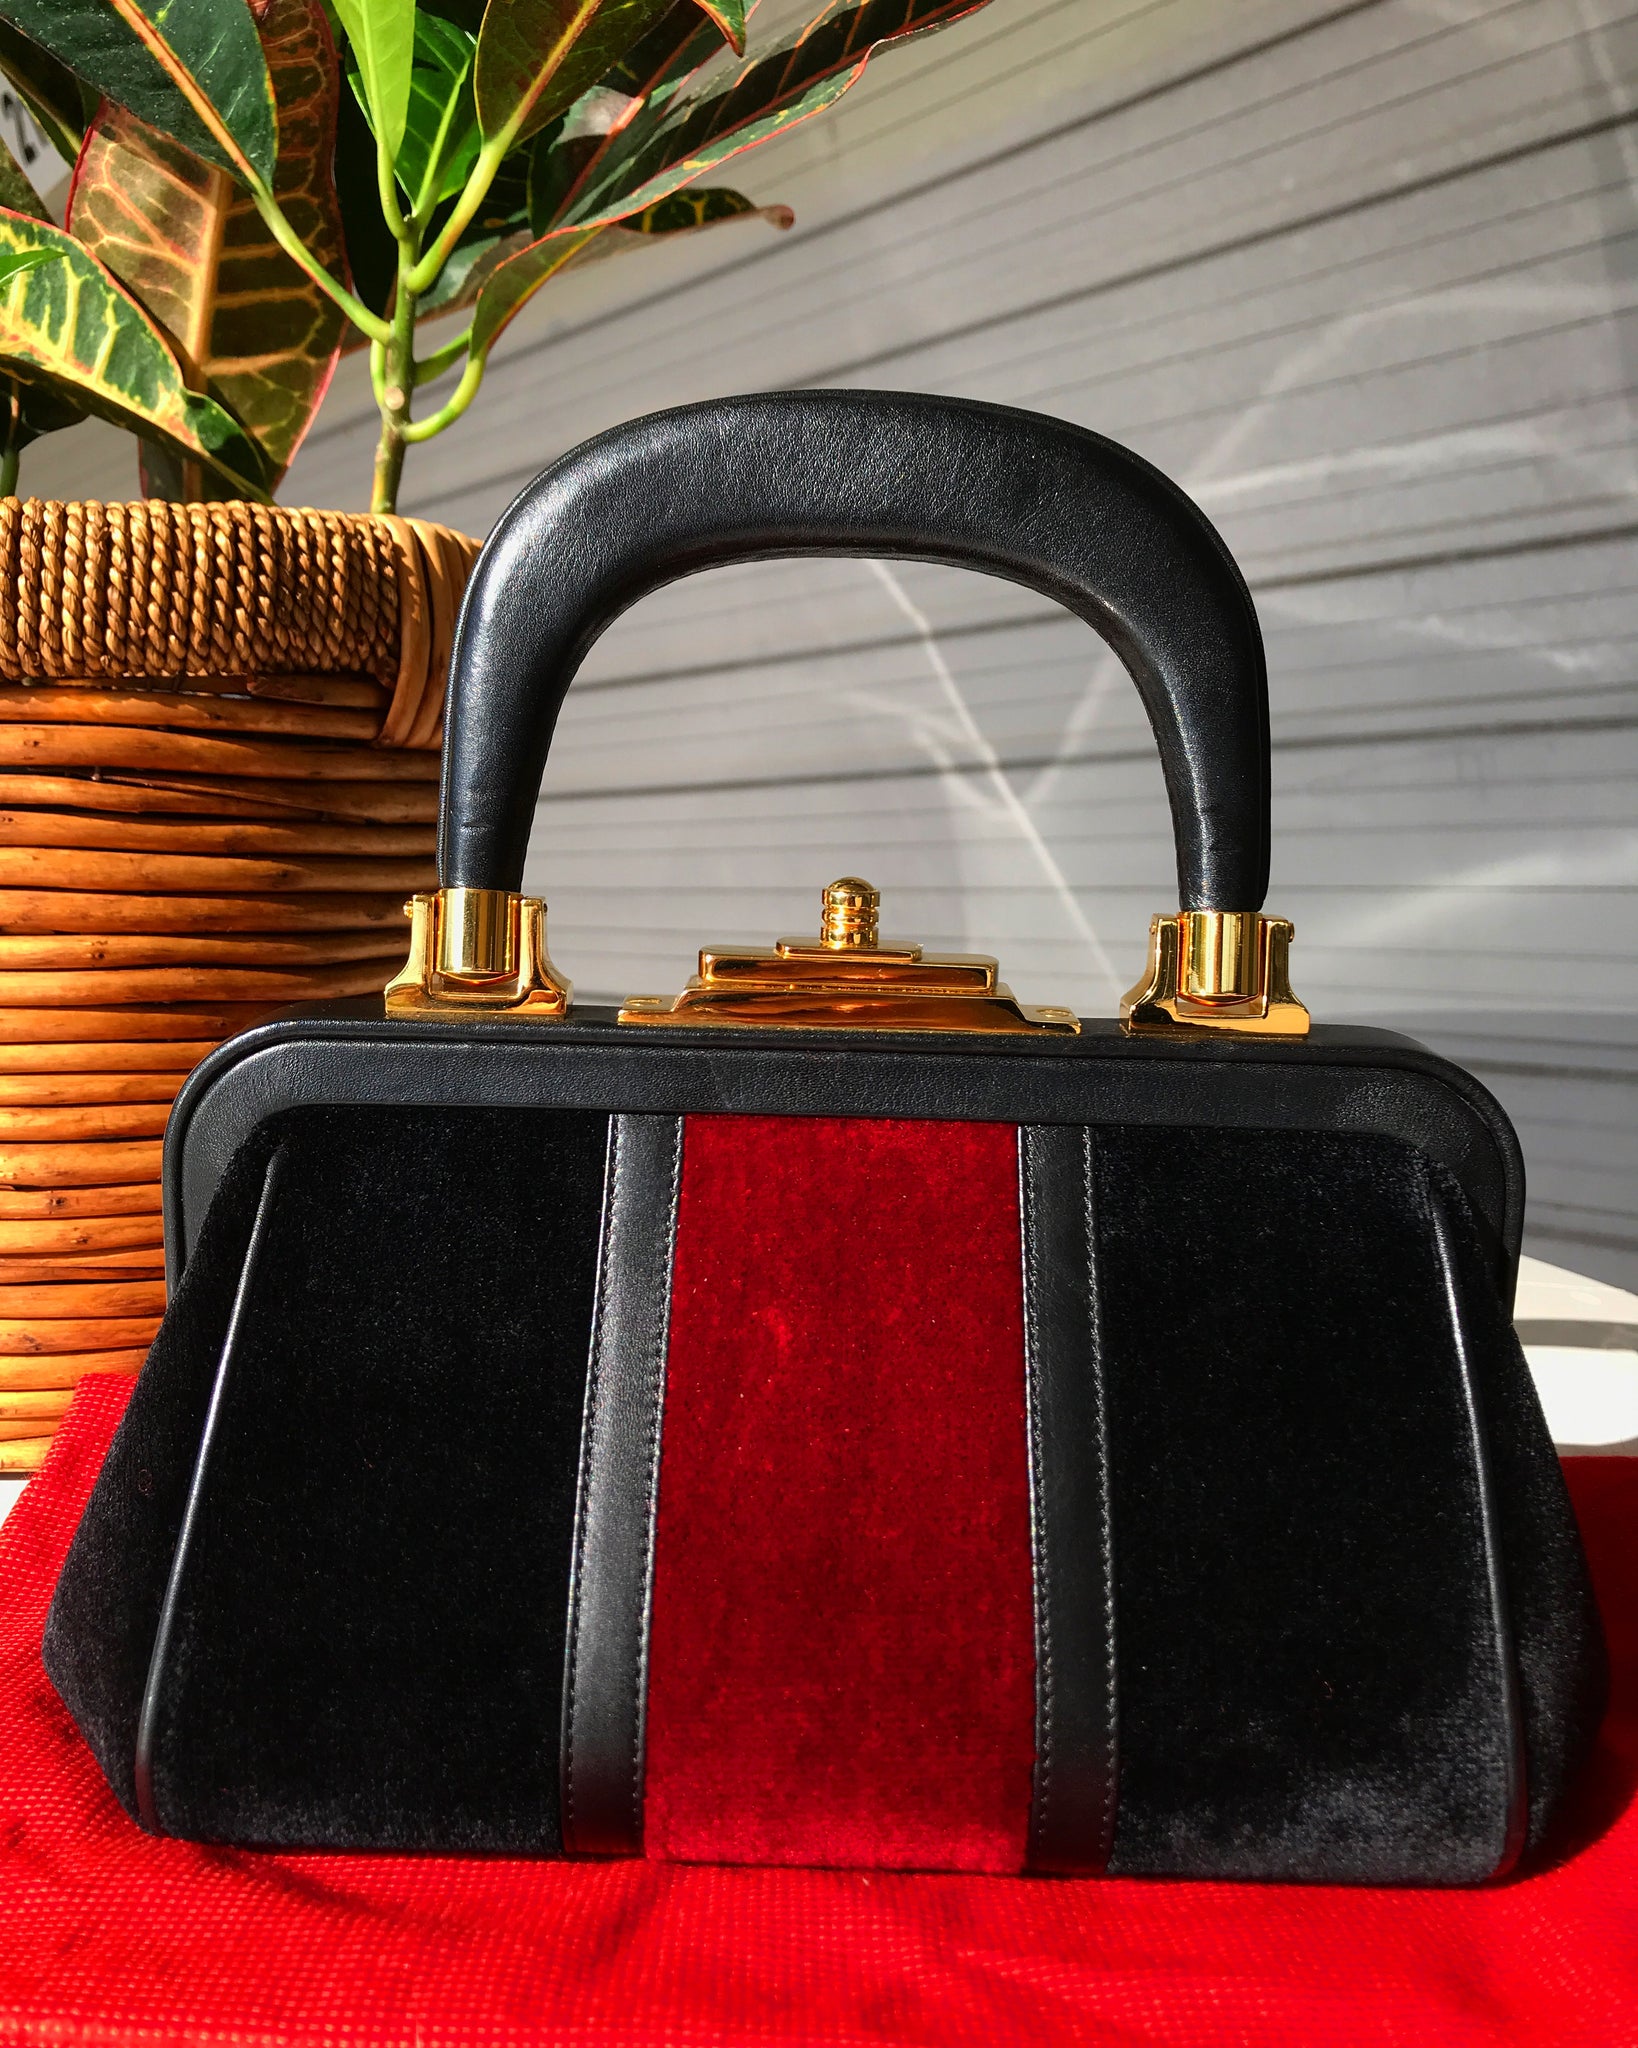 Lush Midnight x Red Velvet Roberta Di Camerino iconic "Bagonghi" bag with gold tone buckles